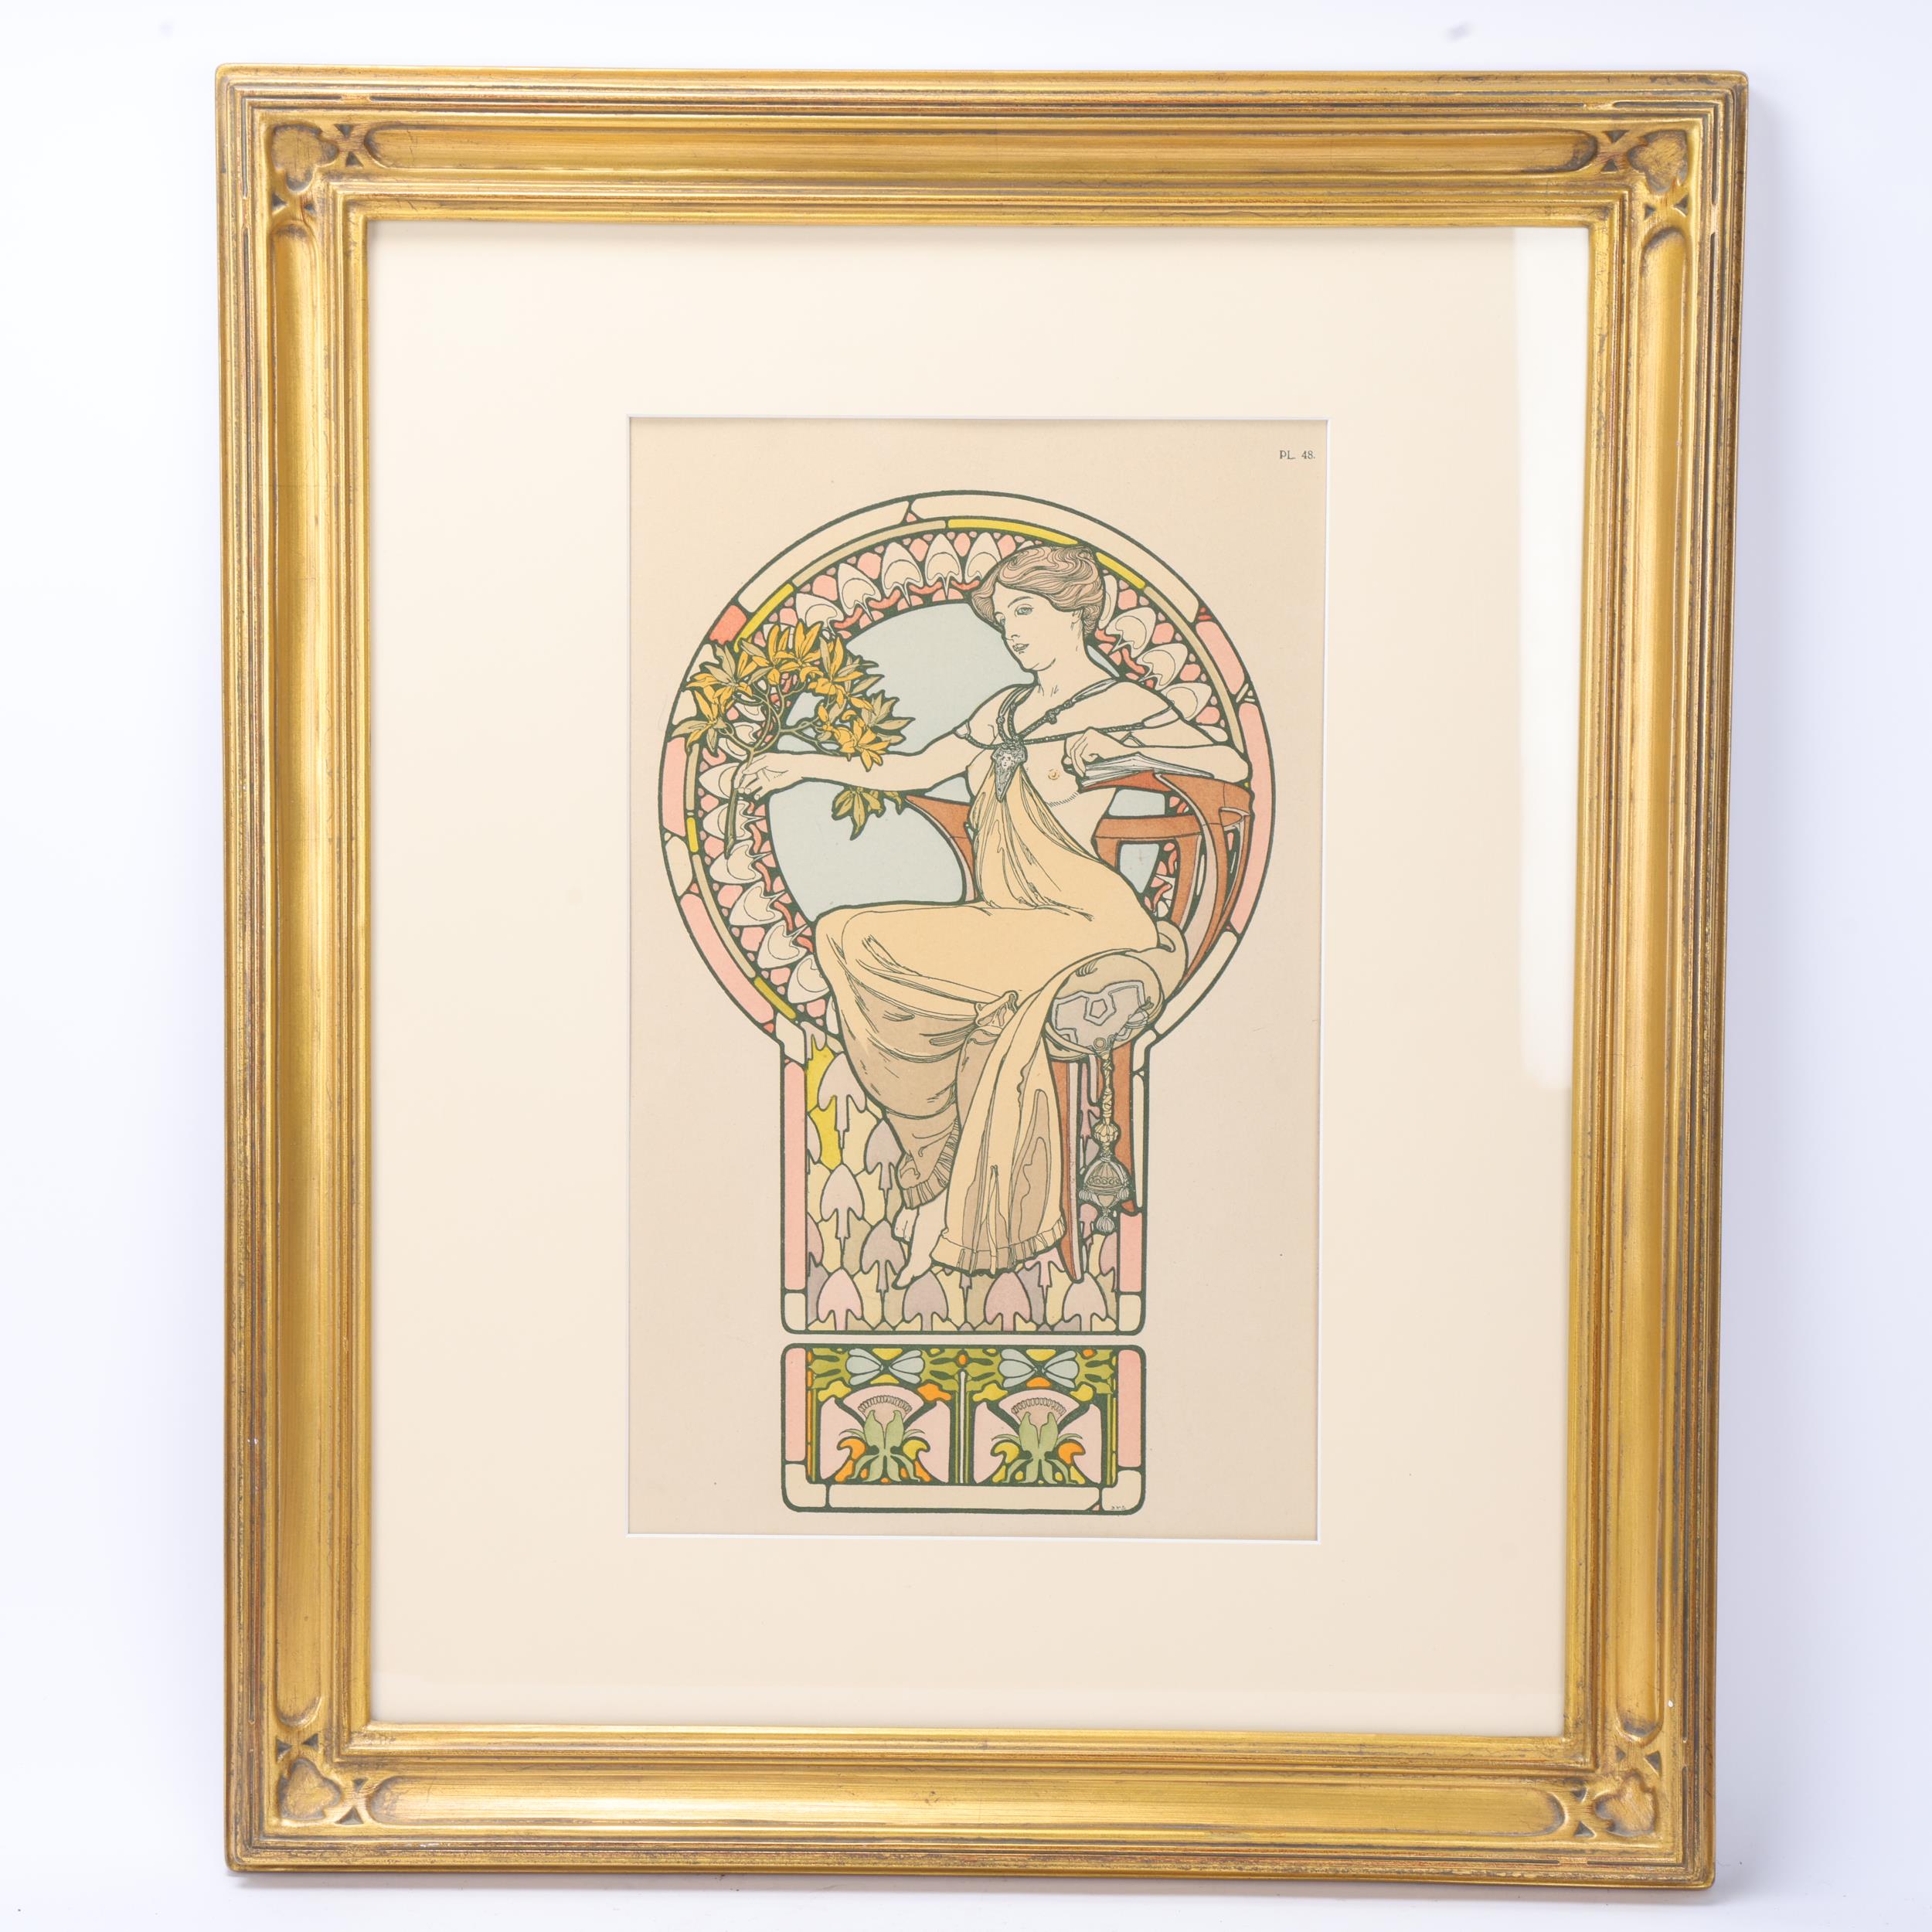 French Art Nouveau lithograph advertising print circa 1902, by Mucha, image 37cm x 23cm, overall - Image 2 of 3